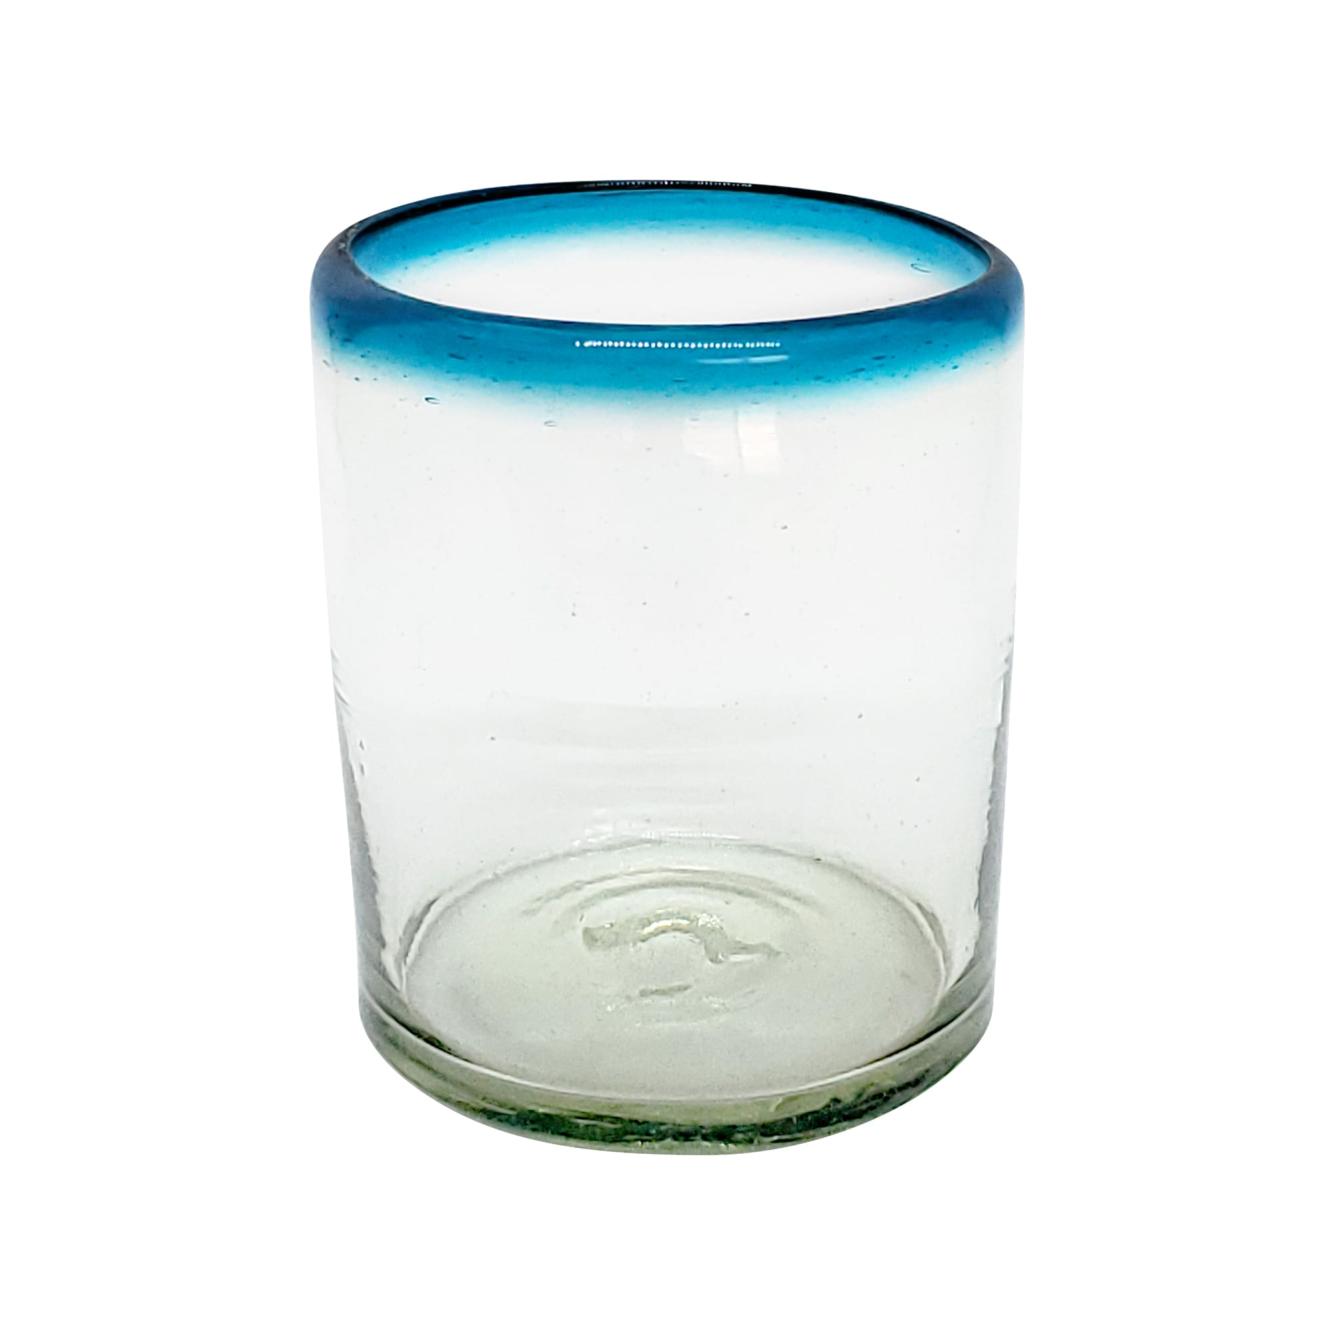 Sale Items / Aqua Blue Rim 10 oz Tumblers  / These tumblers are a great complement for your pitcher and drinking glasses set.<br>1-Year Product Replacement in case of defects (glasses broken in dishwasher is considered a defect).